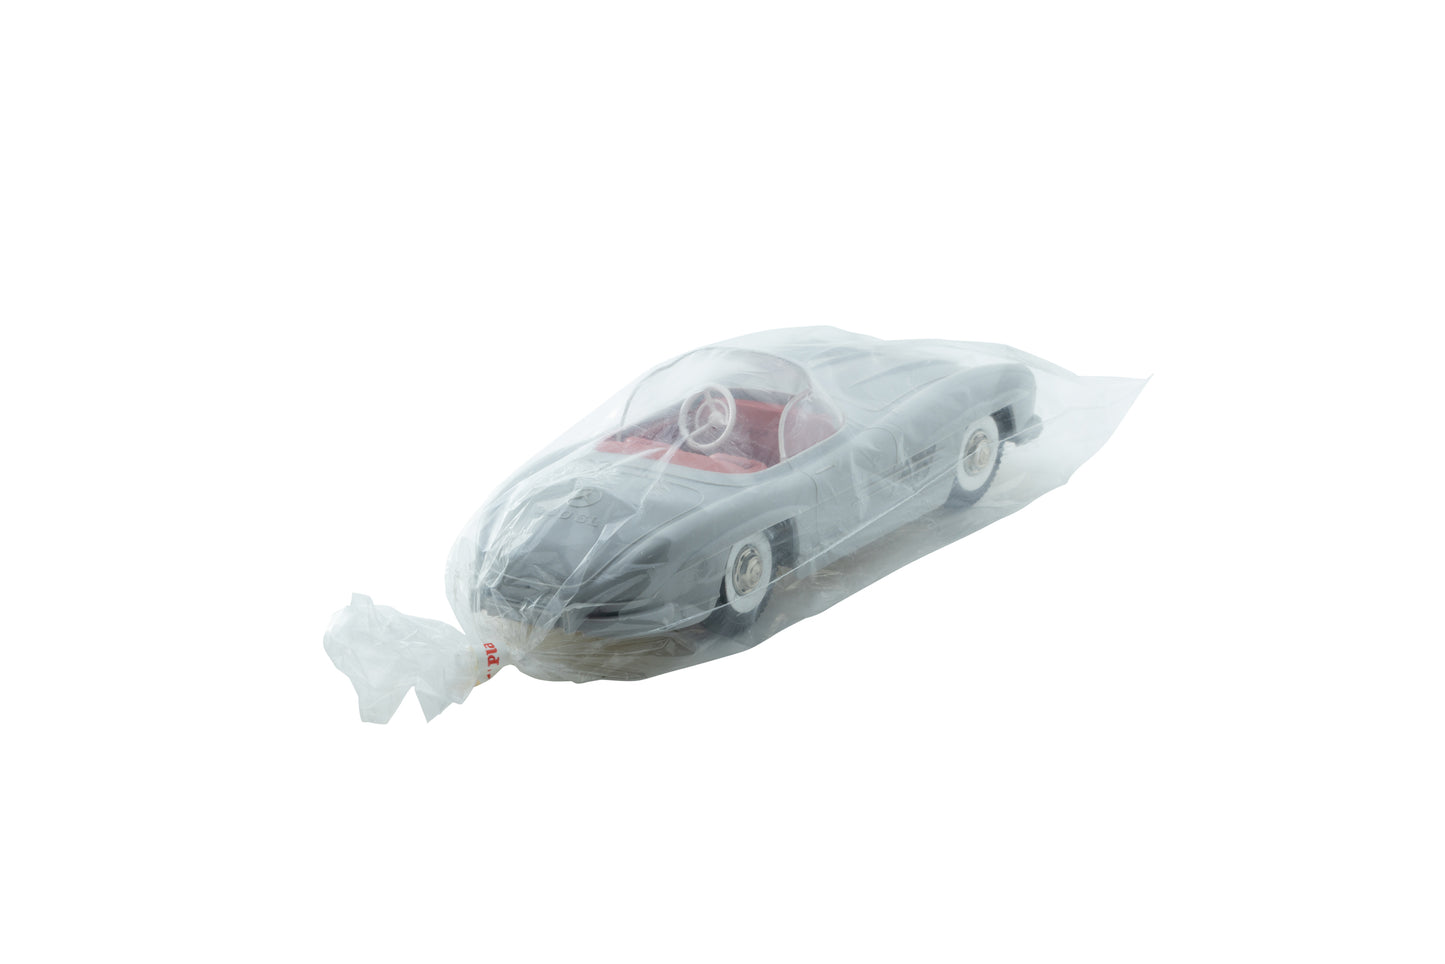 Mercedes Benz 300SL Friction Toy from Rex Toys